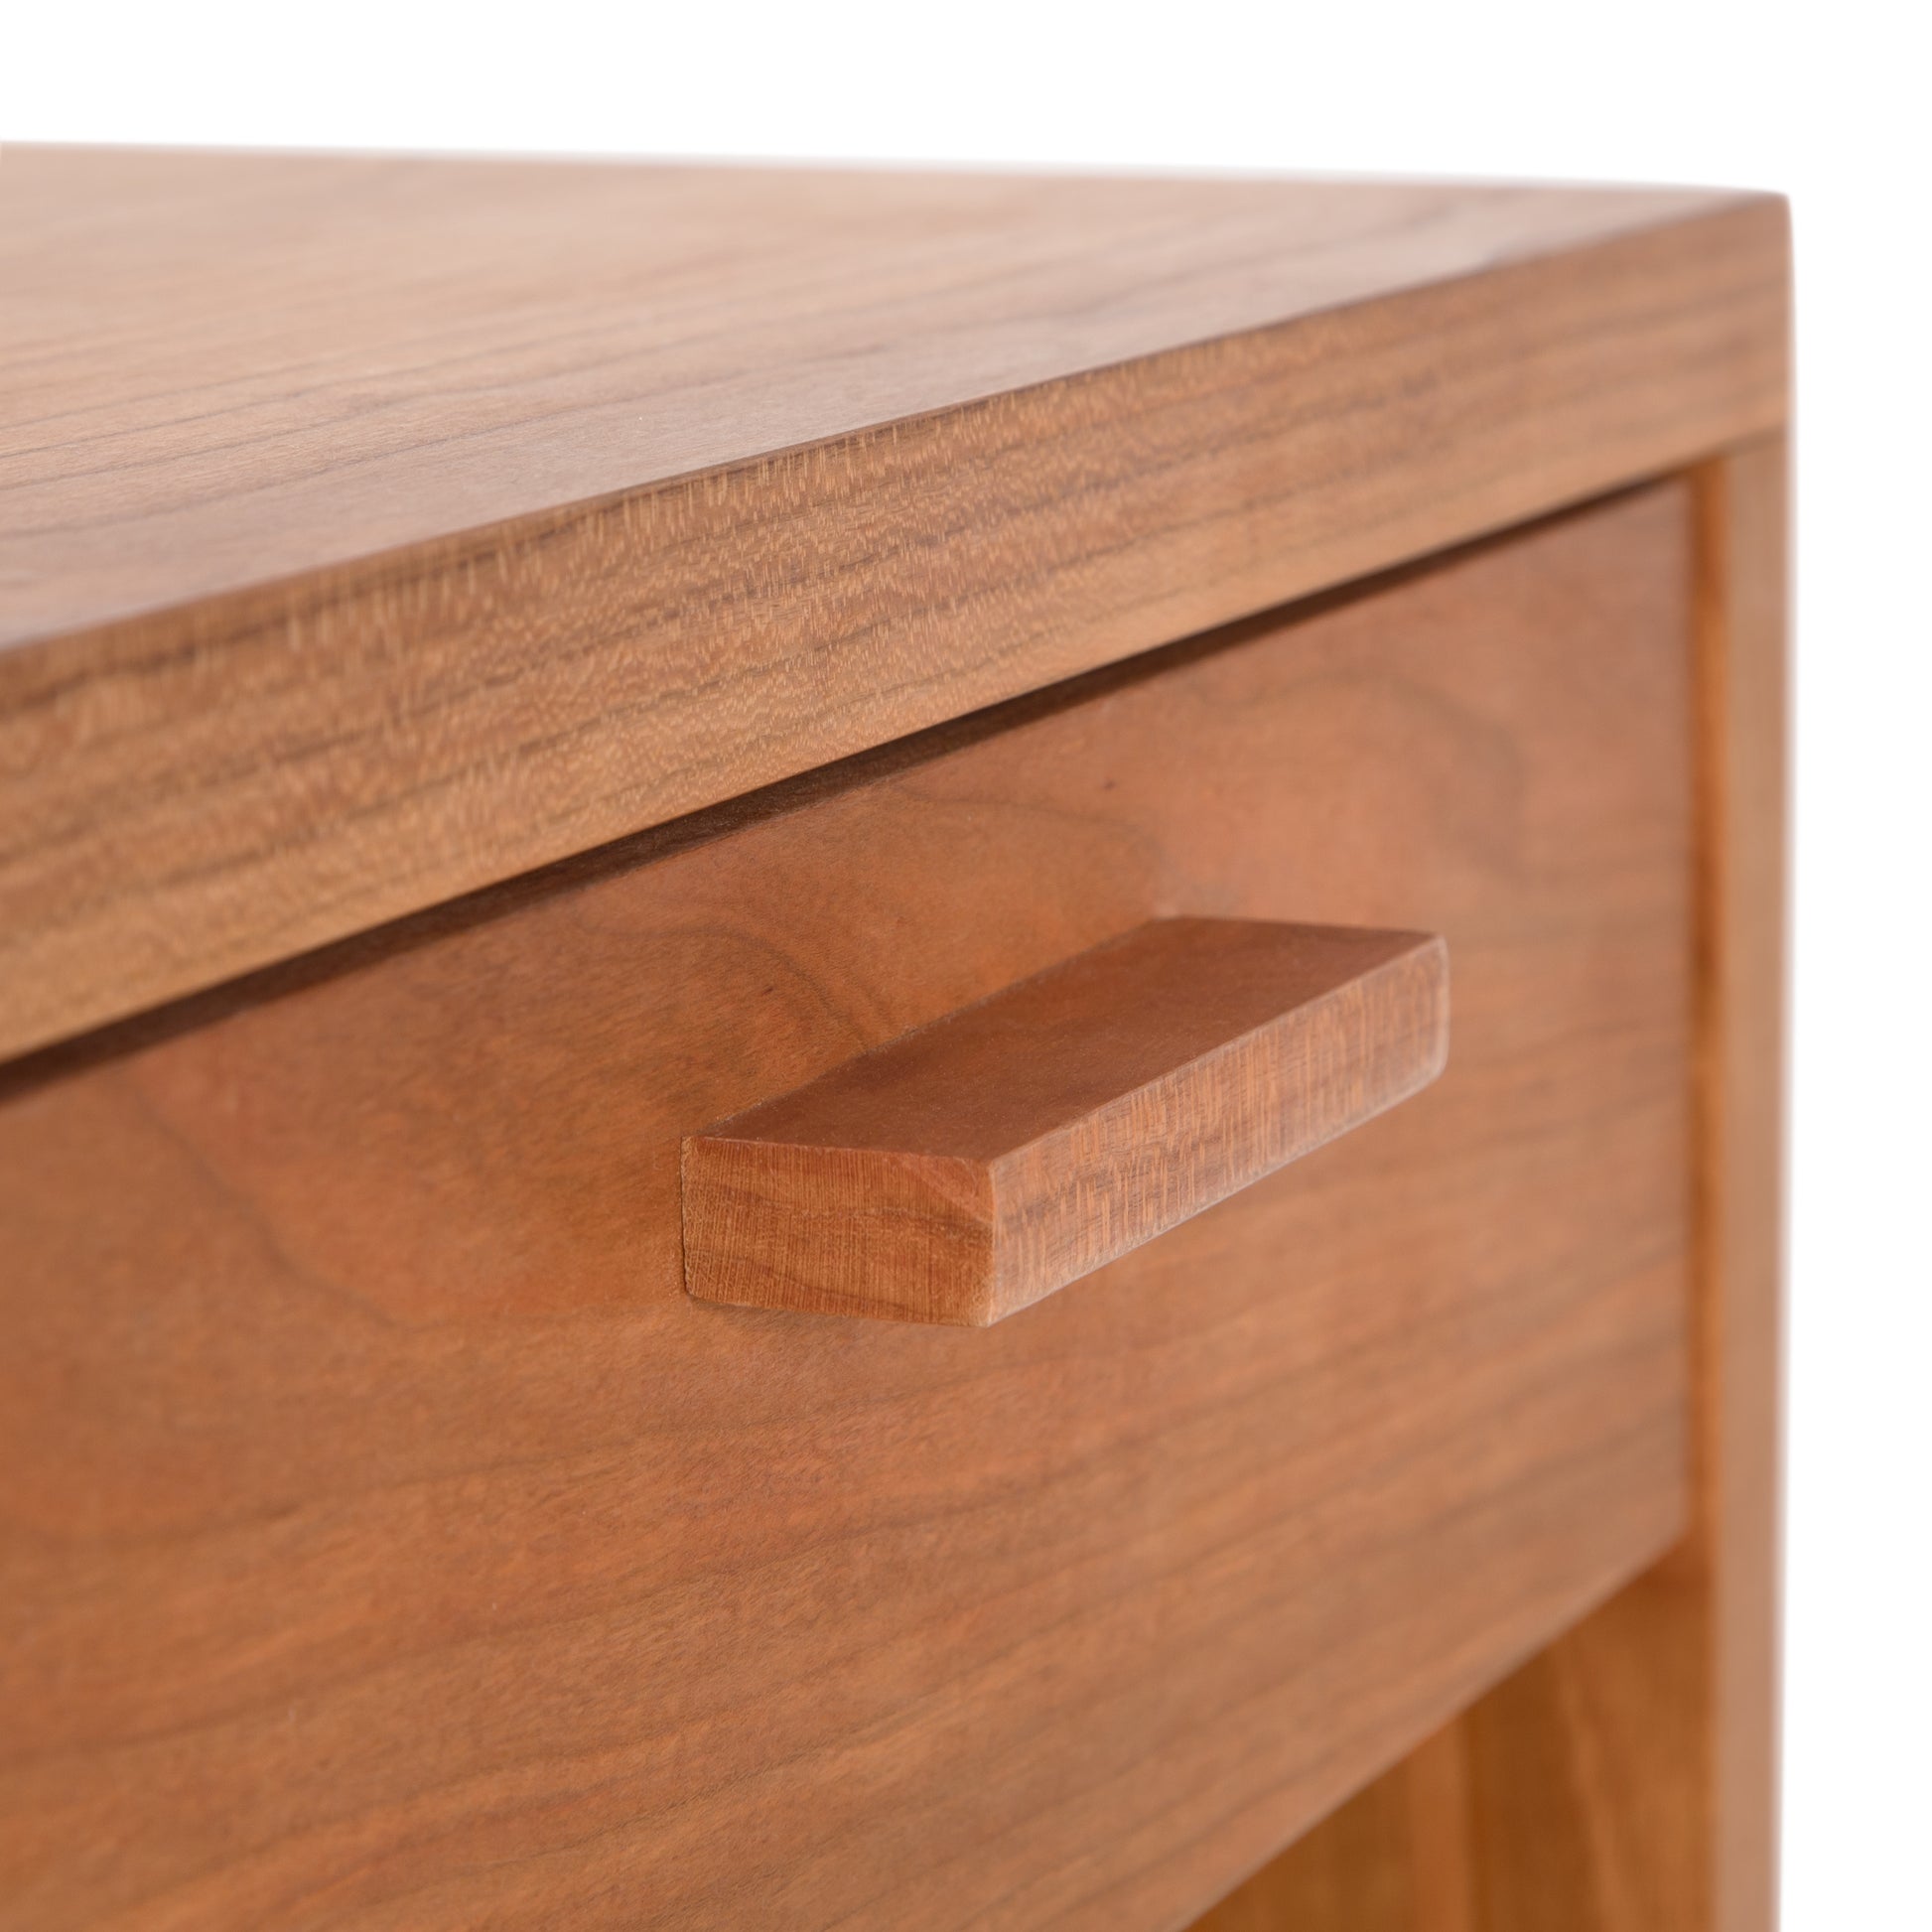 A close up of a Vermont Furniture Designs Loft 1-Drawer Enclosed Shelf Nightstand.